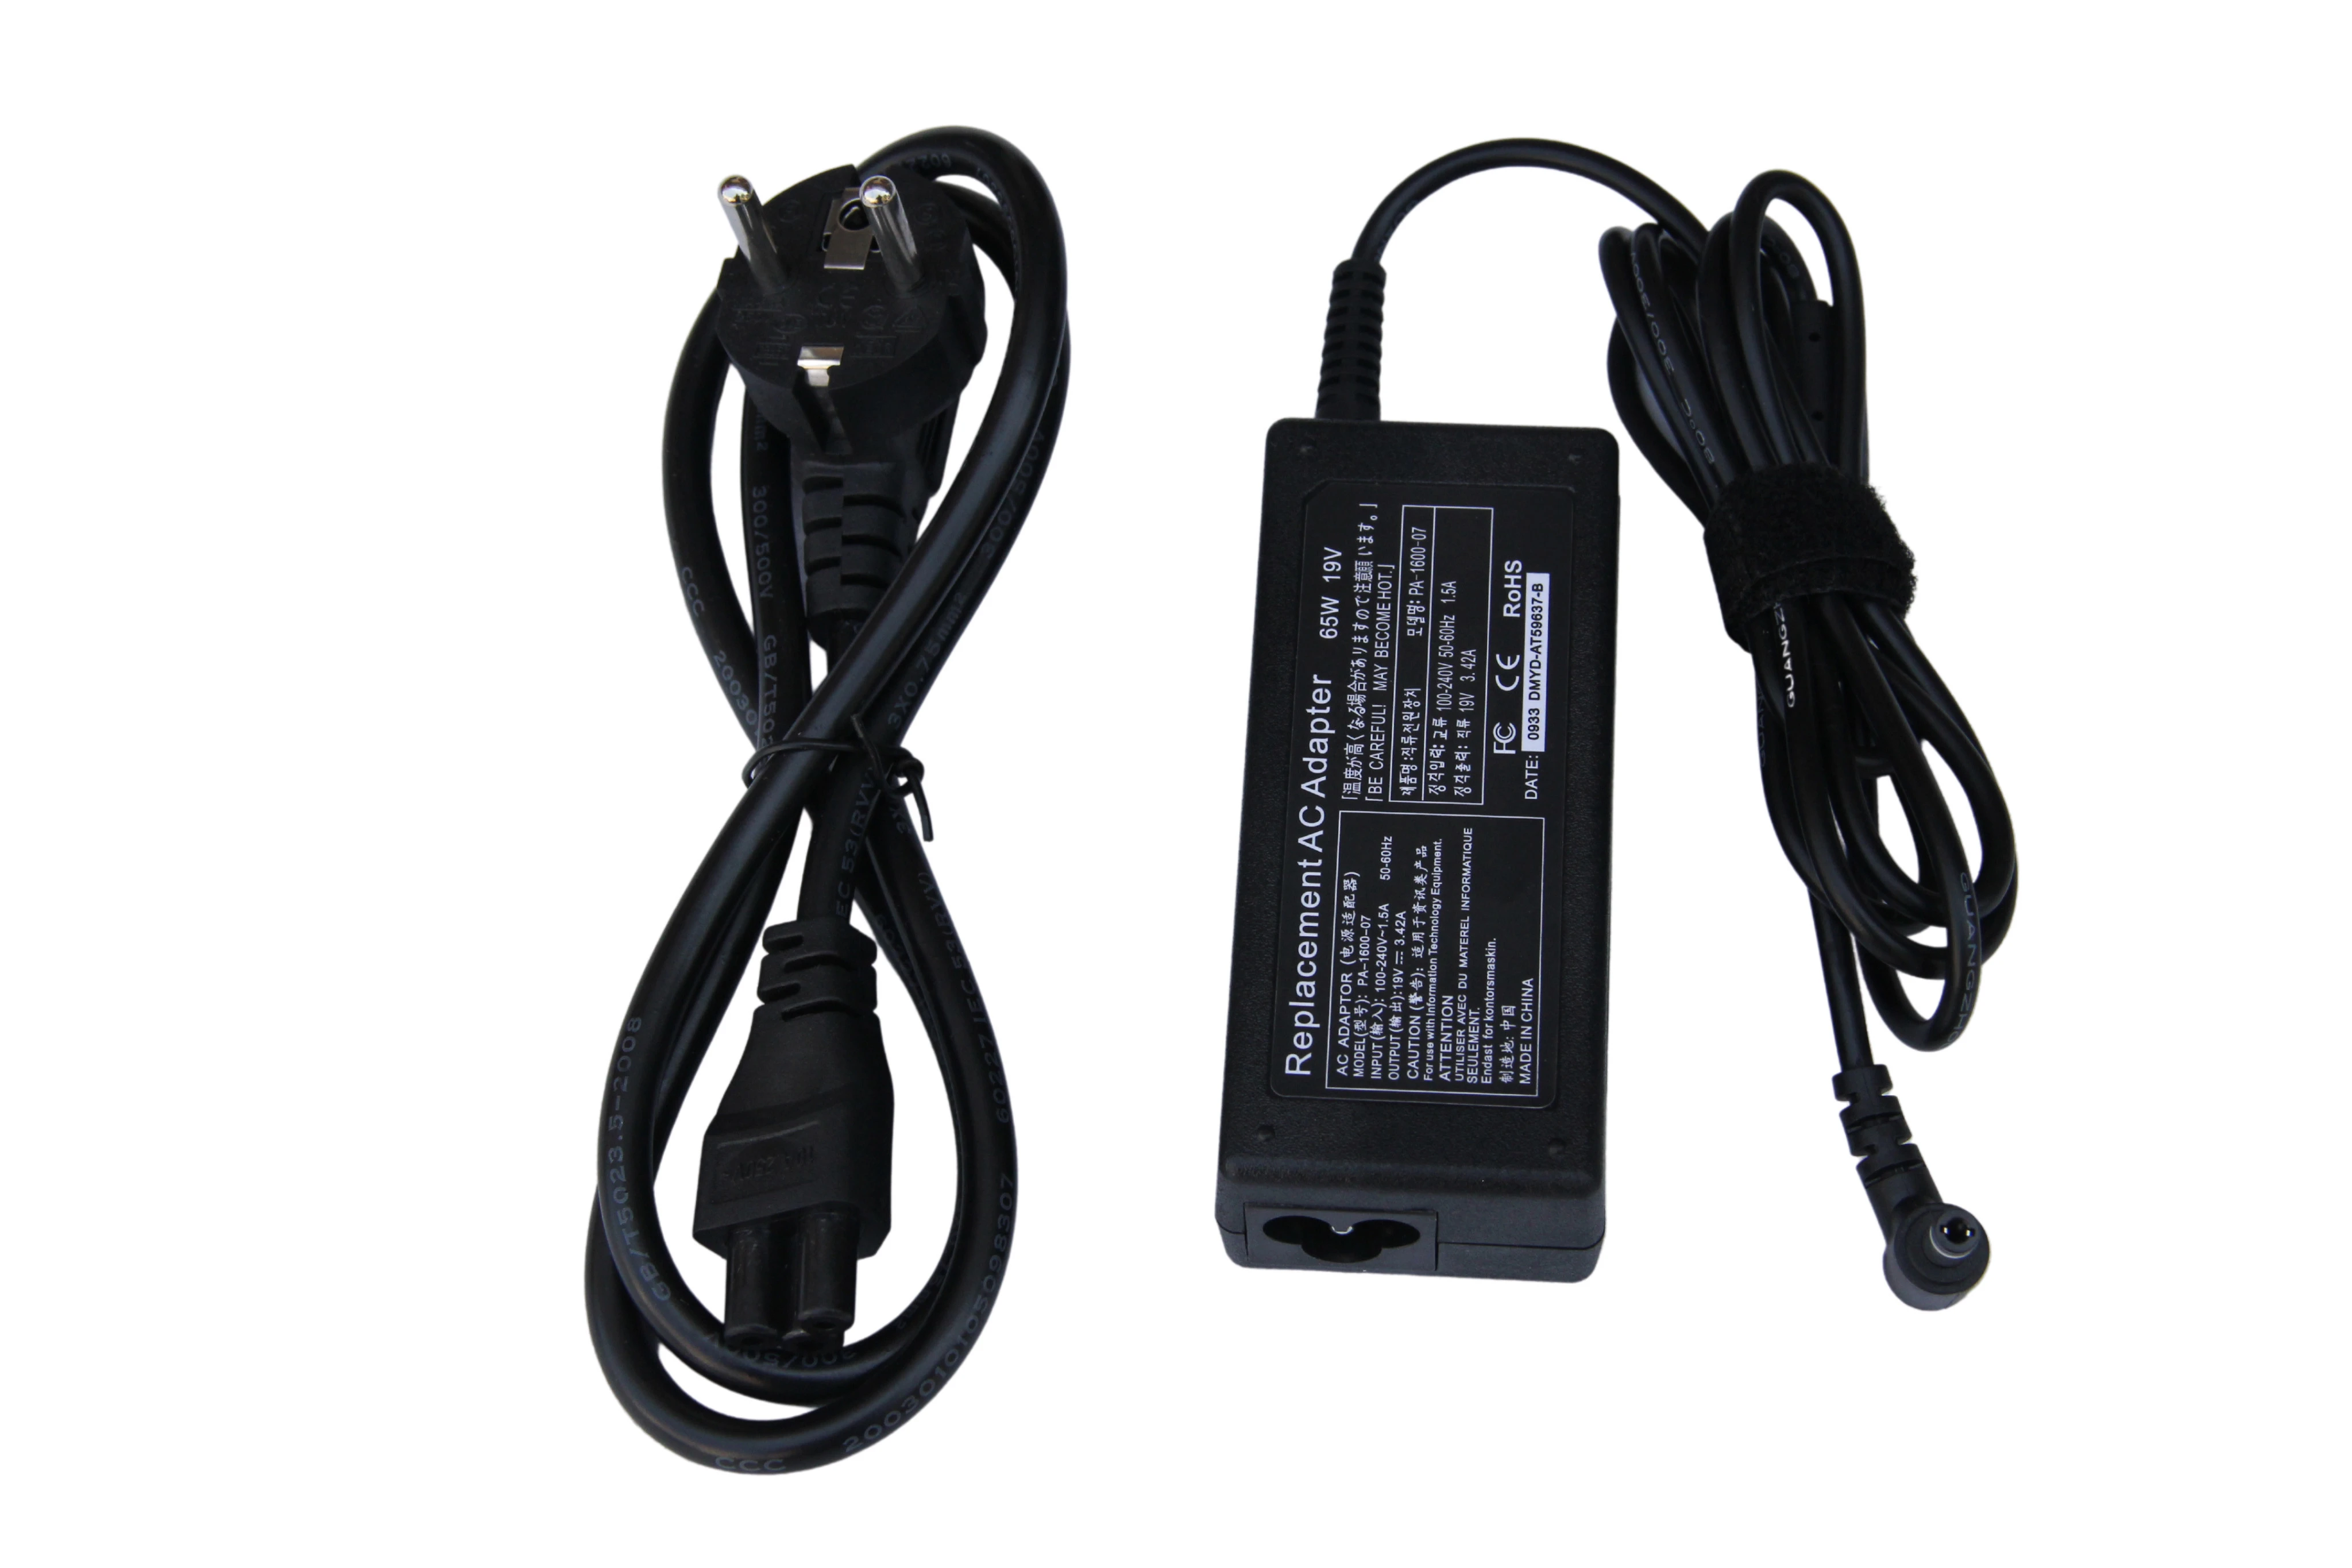 OEM AC DC Power Adapter 65W 19V 3.42A Portable Laptop Charger for Lenovo